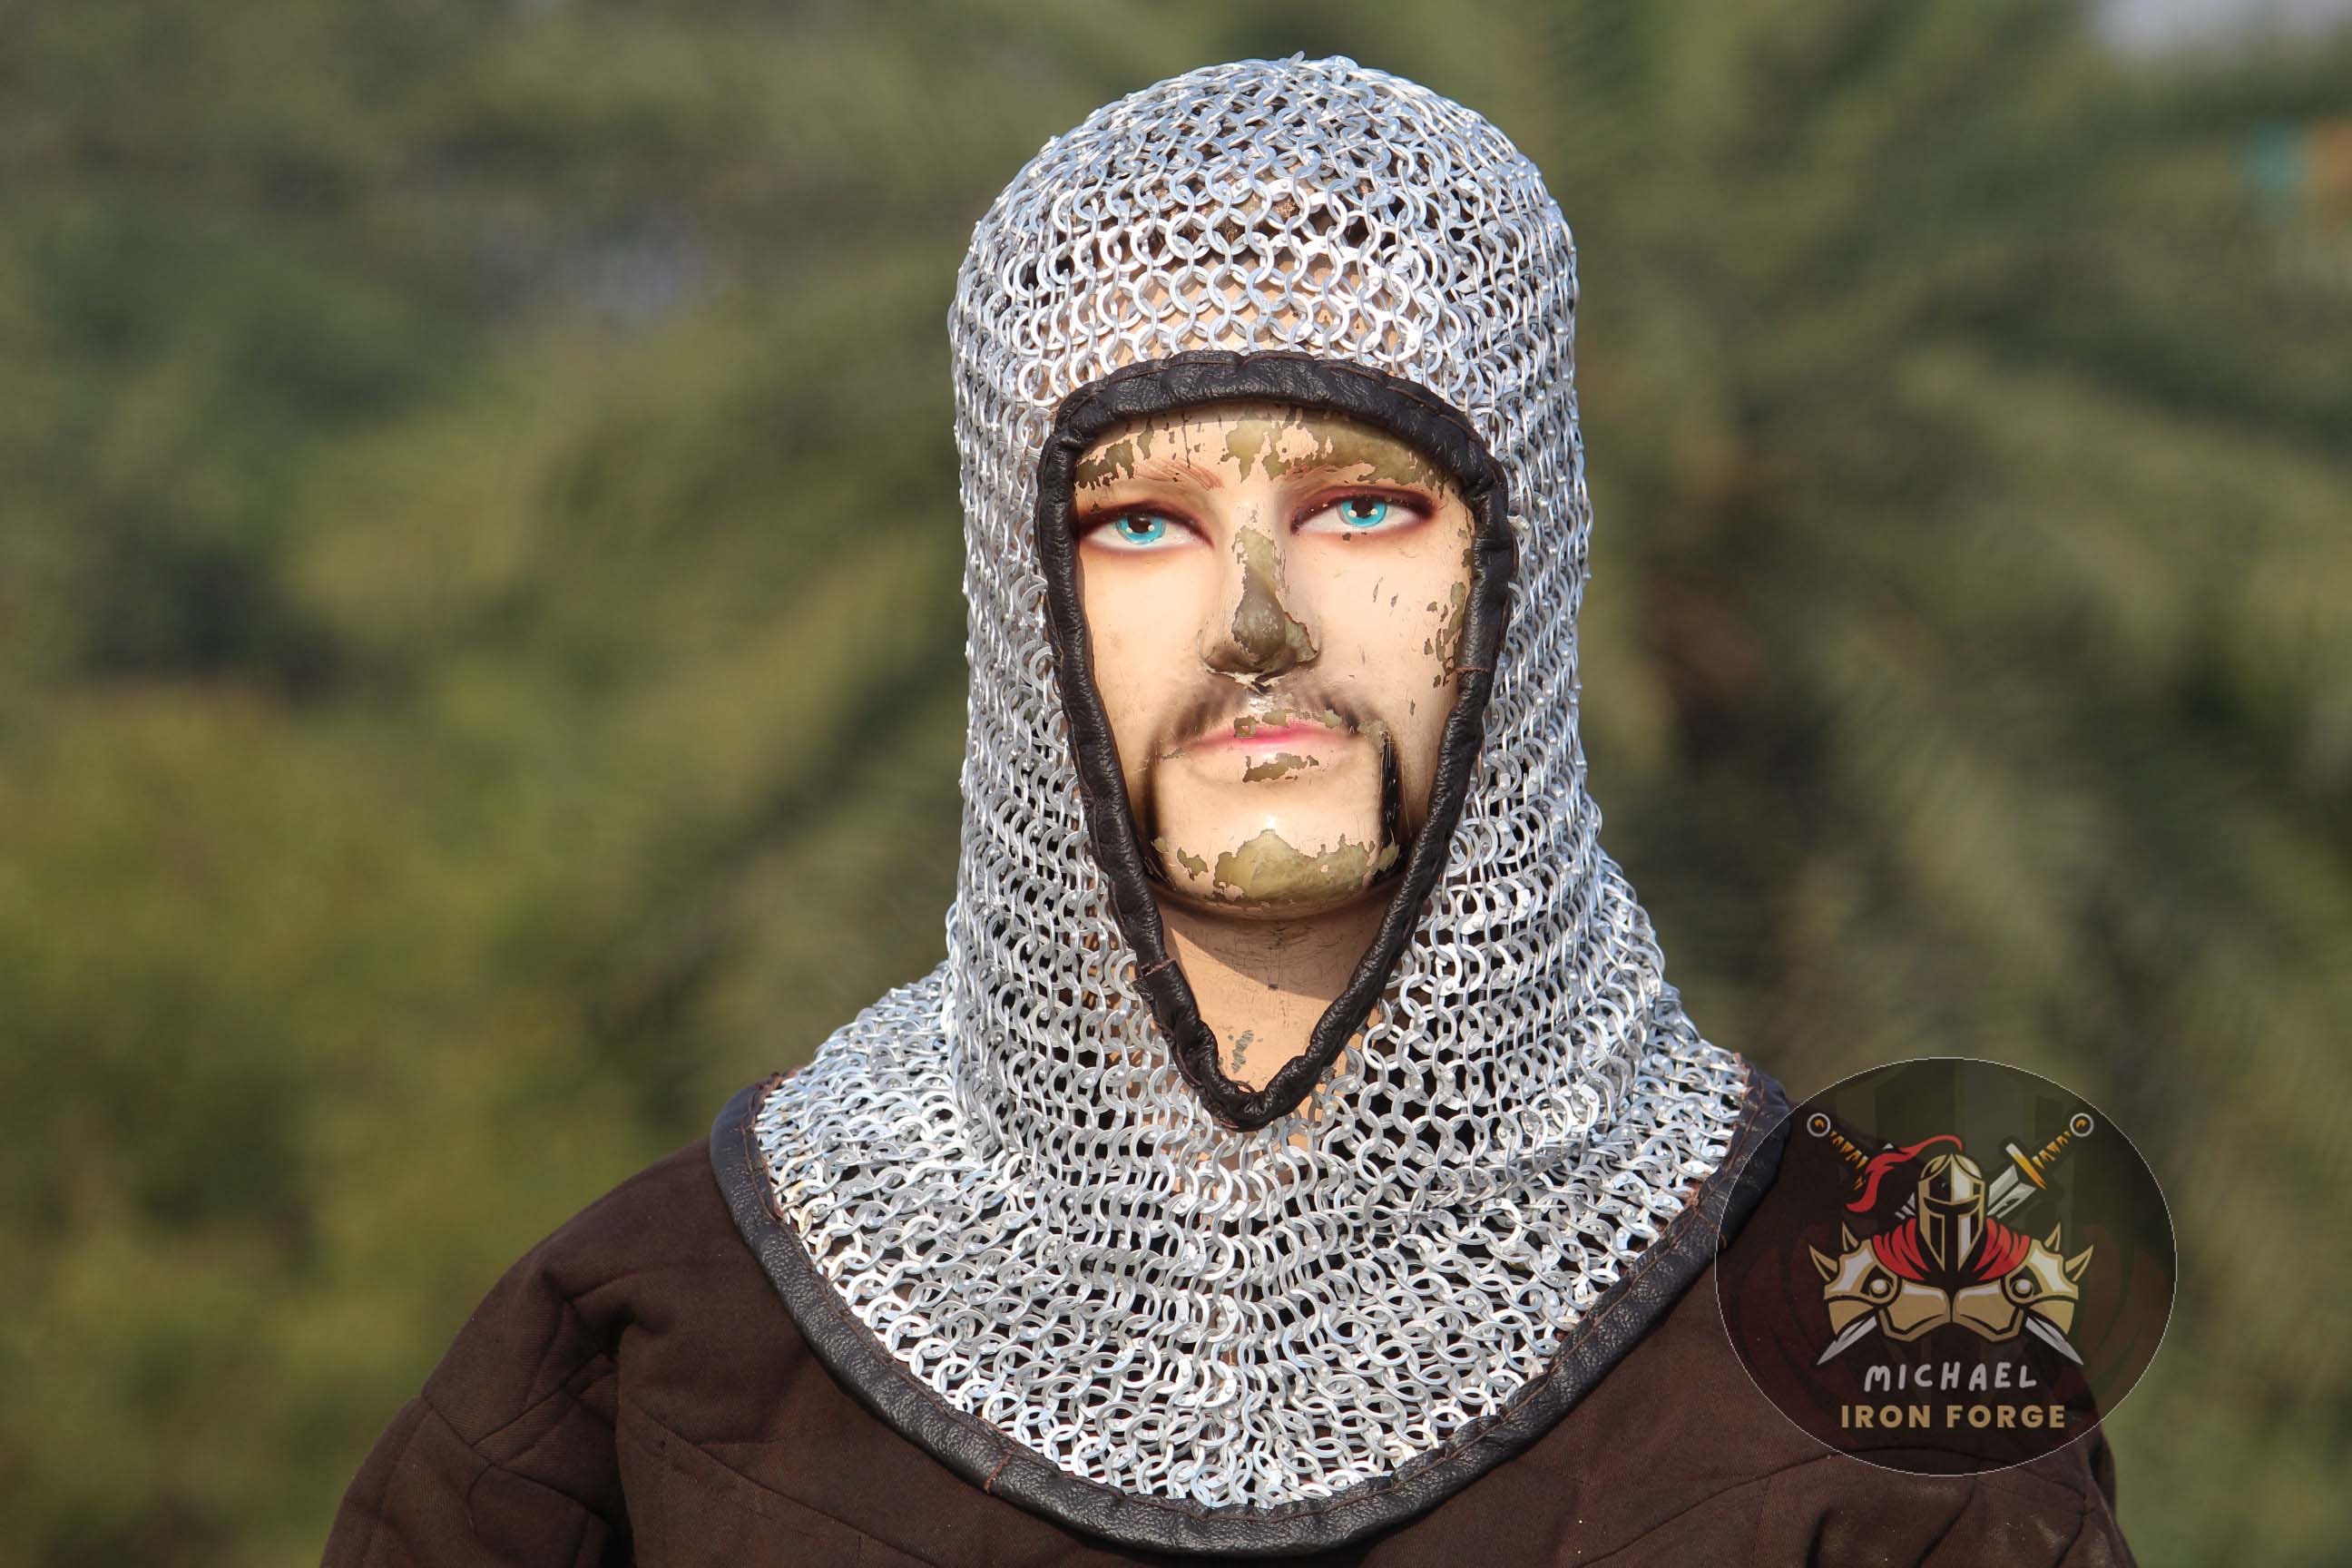 Battle Ready Chain Mail Coif Armor Medieval Inspired Renaissance Faire  Costume Reenactment Zinc Plated Steel Chainmail Head Armor -  Norway